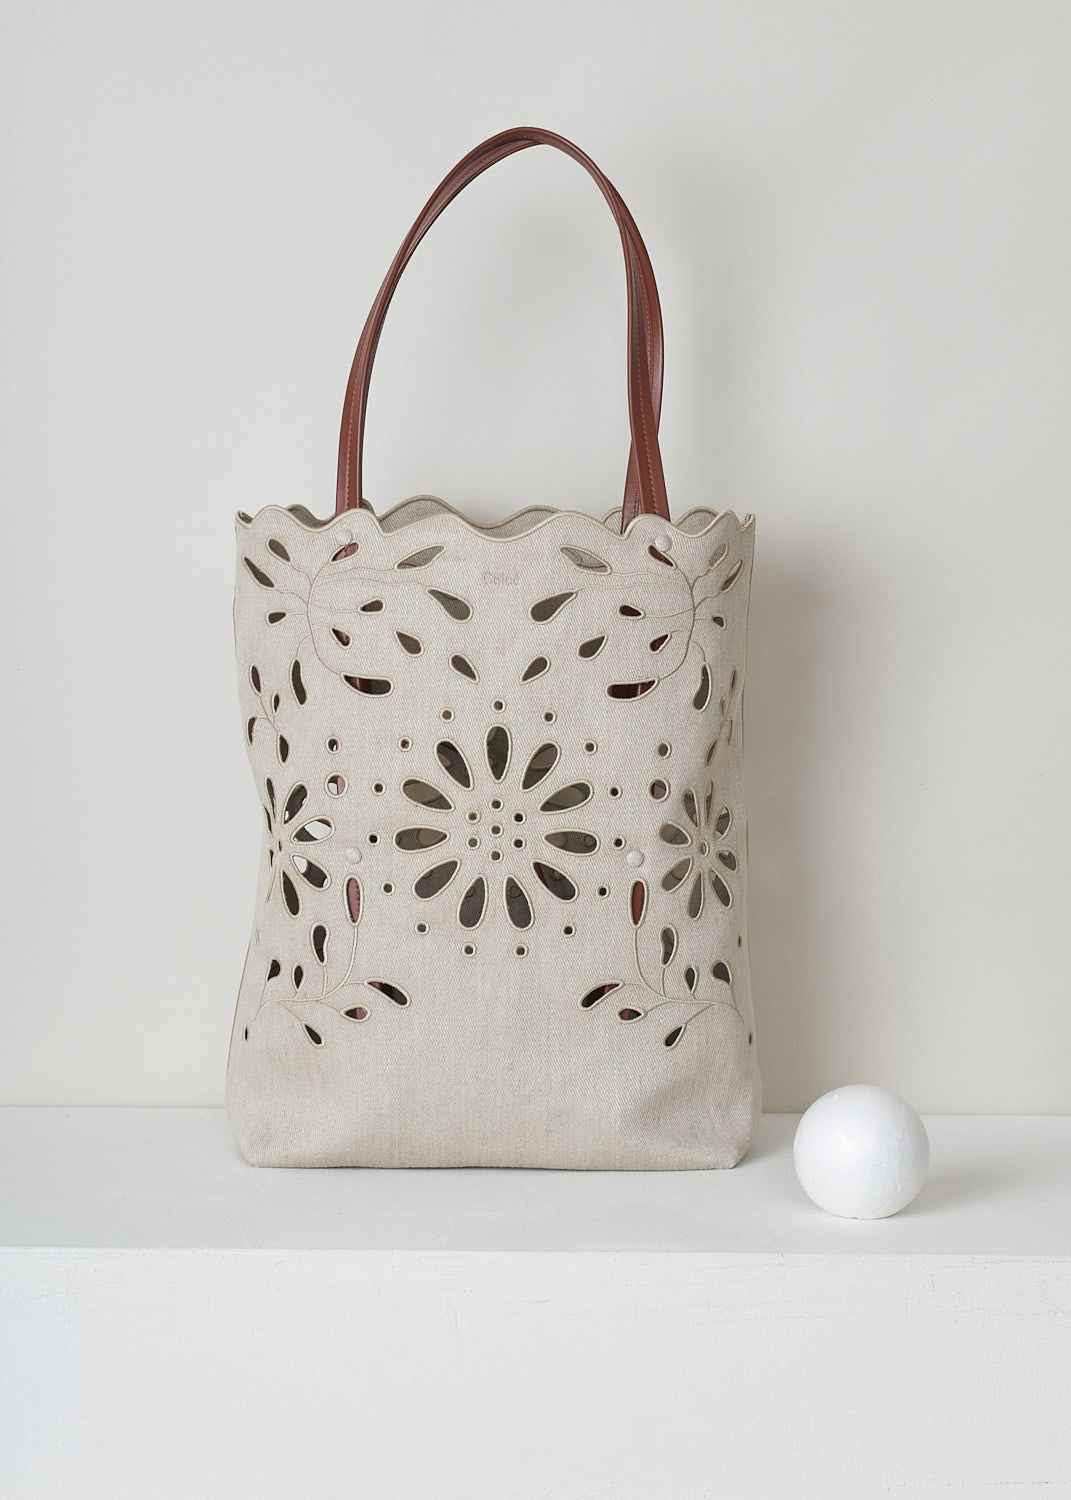 CHLOÉ LARGE KAMILLA NORTH - SOUTH TOTE BAG IN SEPIA BROWN
,CHC22SS492G2327S_KAMILLA_LARGE_NORTH_SO, Beige, Front, This large Kamilla North - South tote bag in sepia brown has two tan leather top handles. The linen has a scalloped top edge and floral broderie anglaise detailing throughout. On the inside, the bag has a removable tan leather pouch with a zipper.  